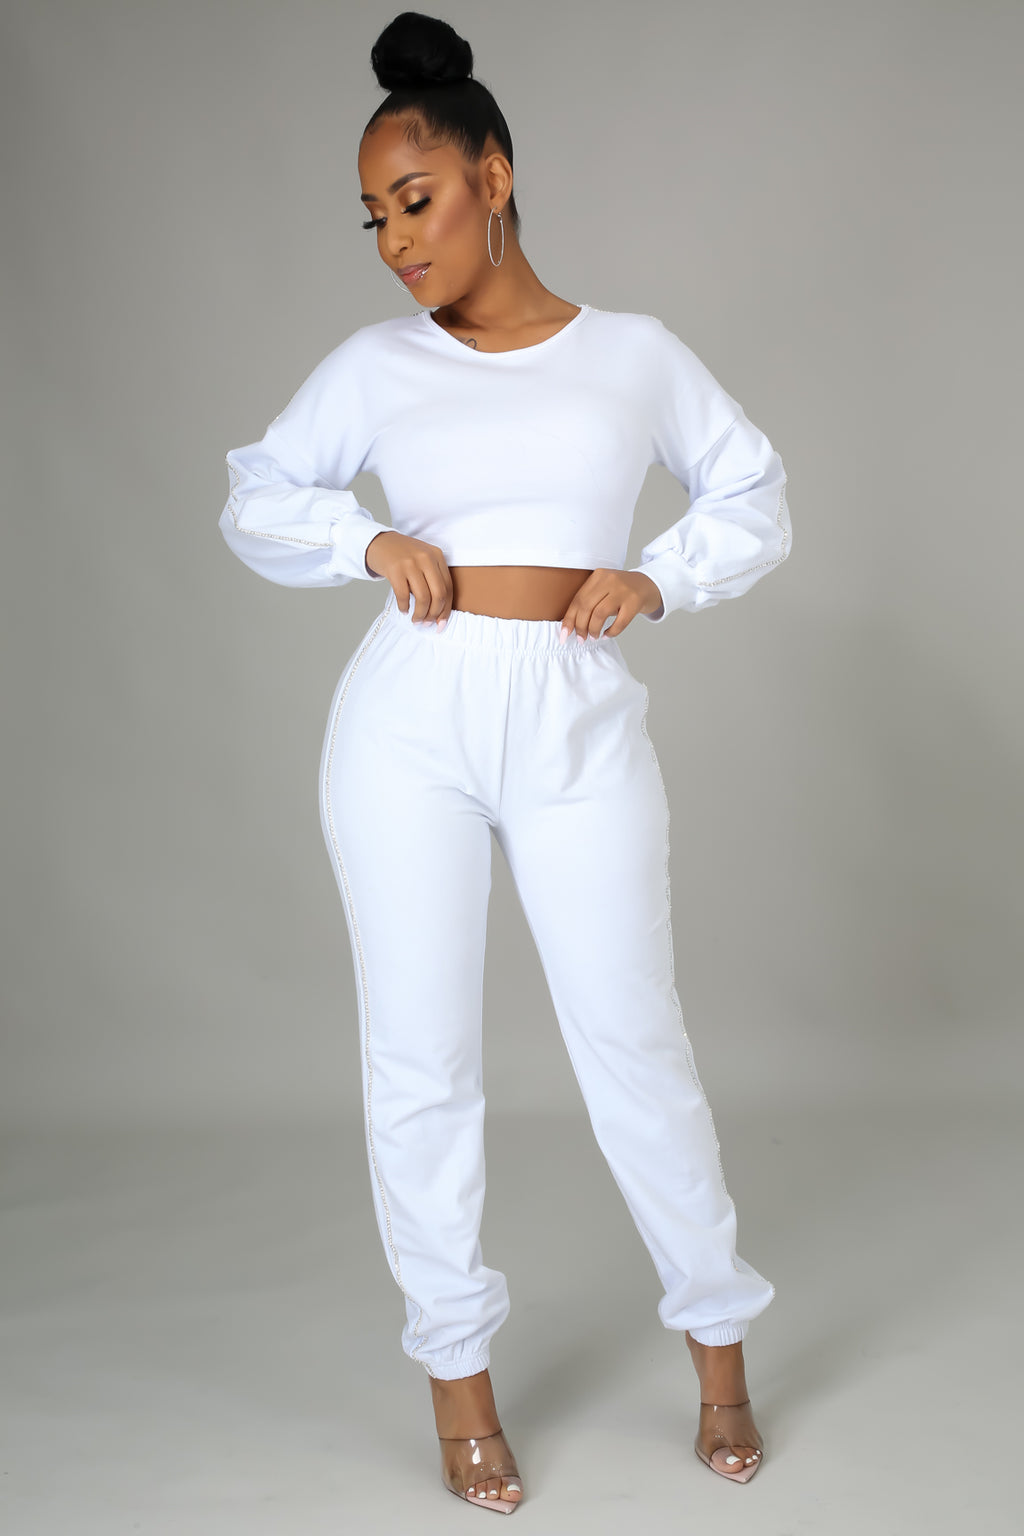 Sparkle Lounging Pant Set - Classy & Sassy Styles Boutique